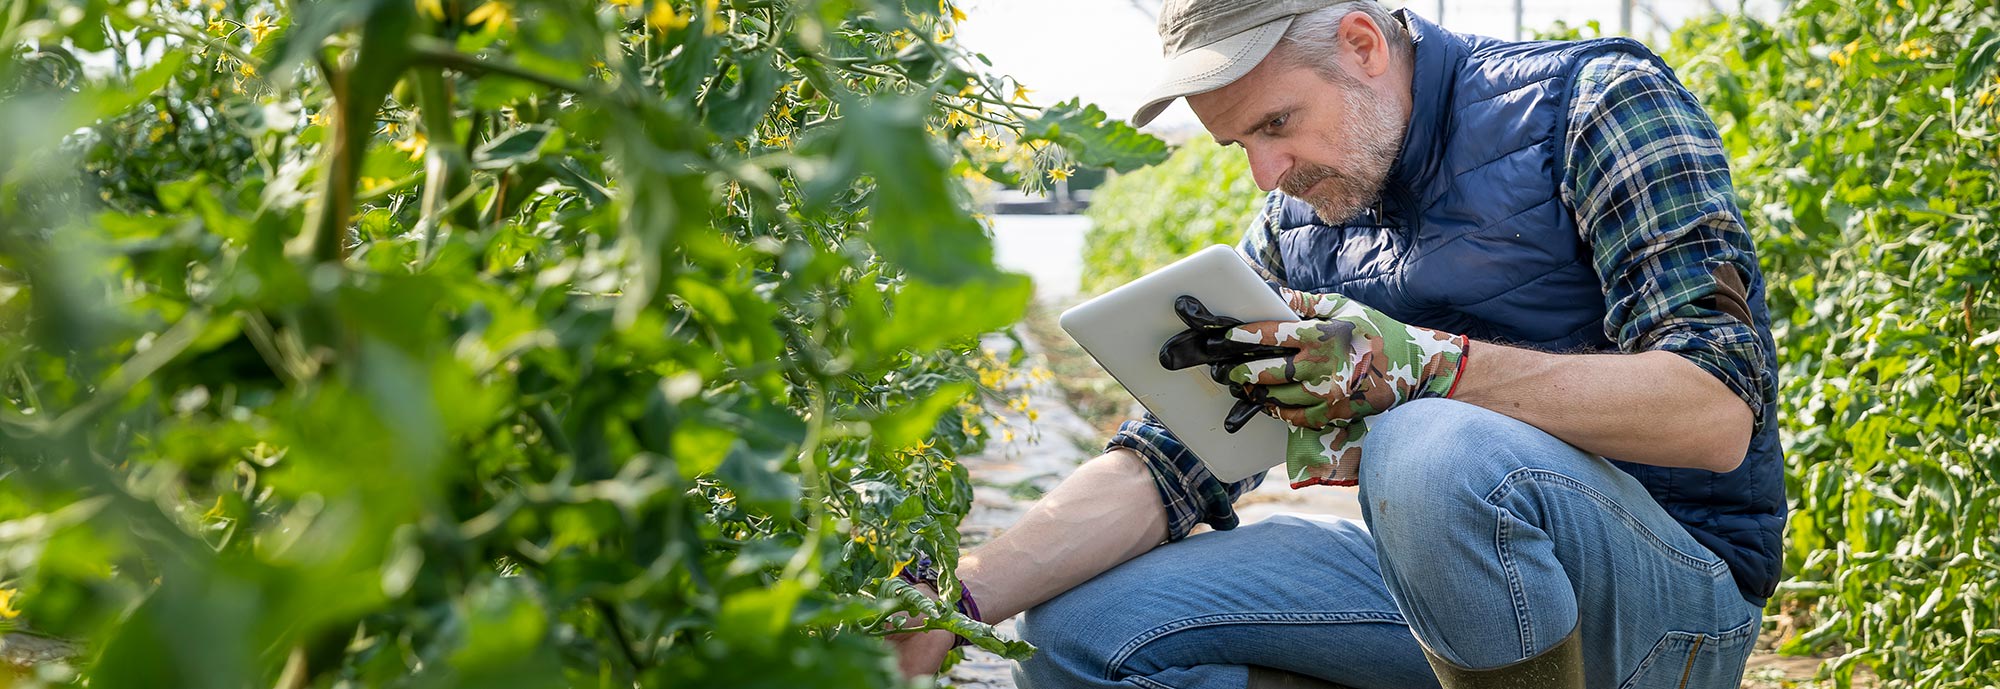 A man in rubber boots is holding a tablet and squats to check plants in a greenhouse. The 5G technology enables virtual tours of networked factories, driving digitalization forward.